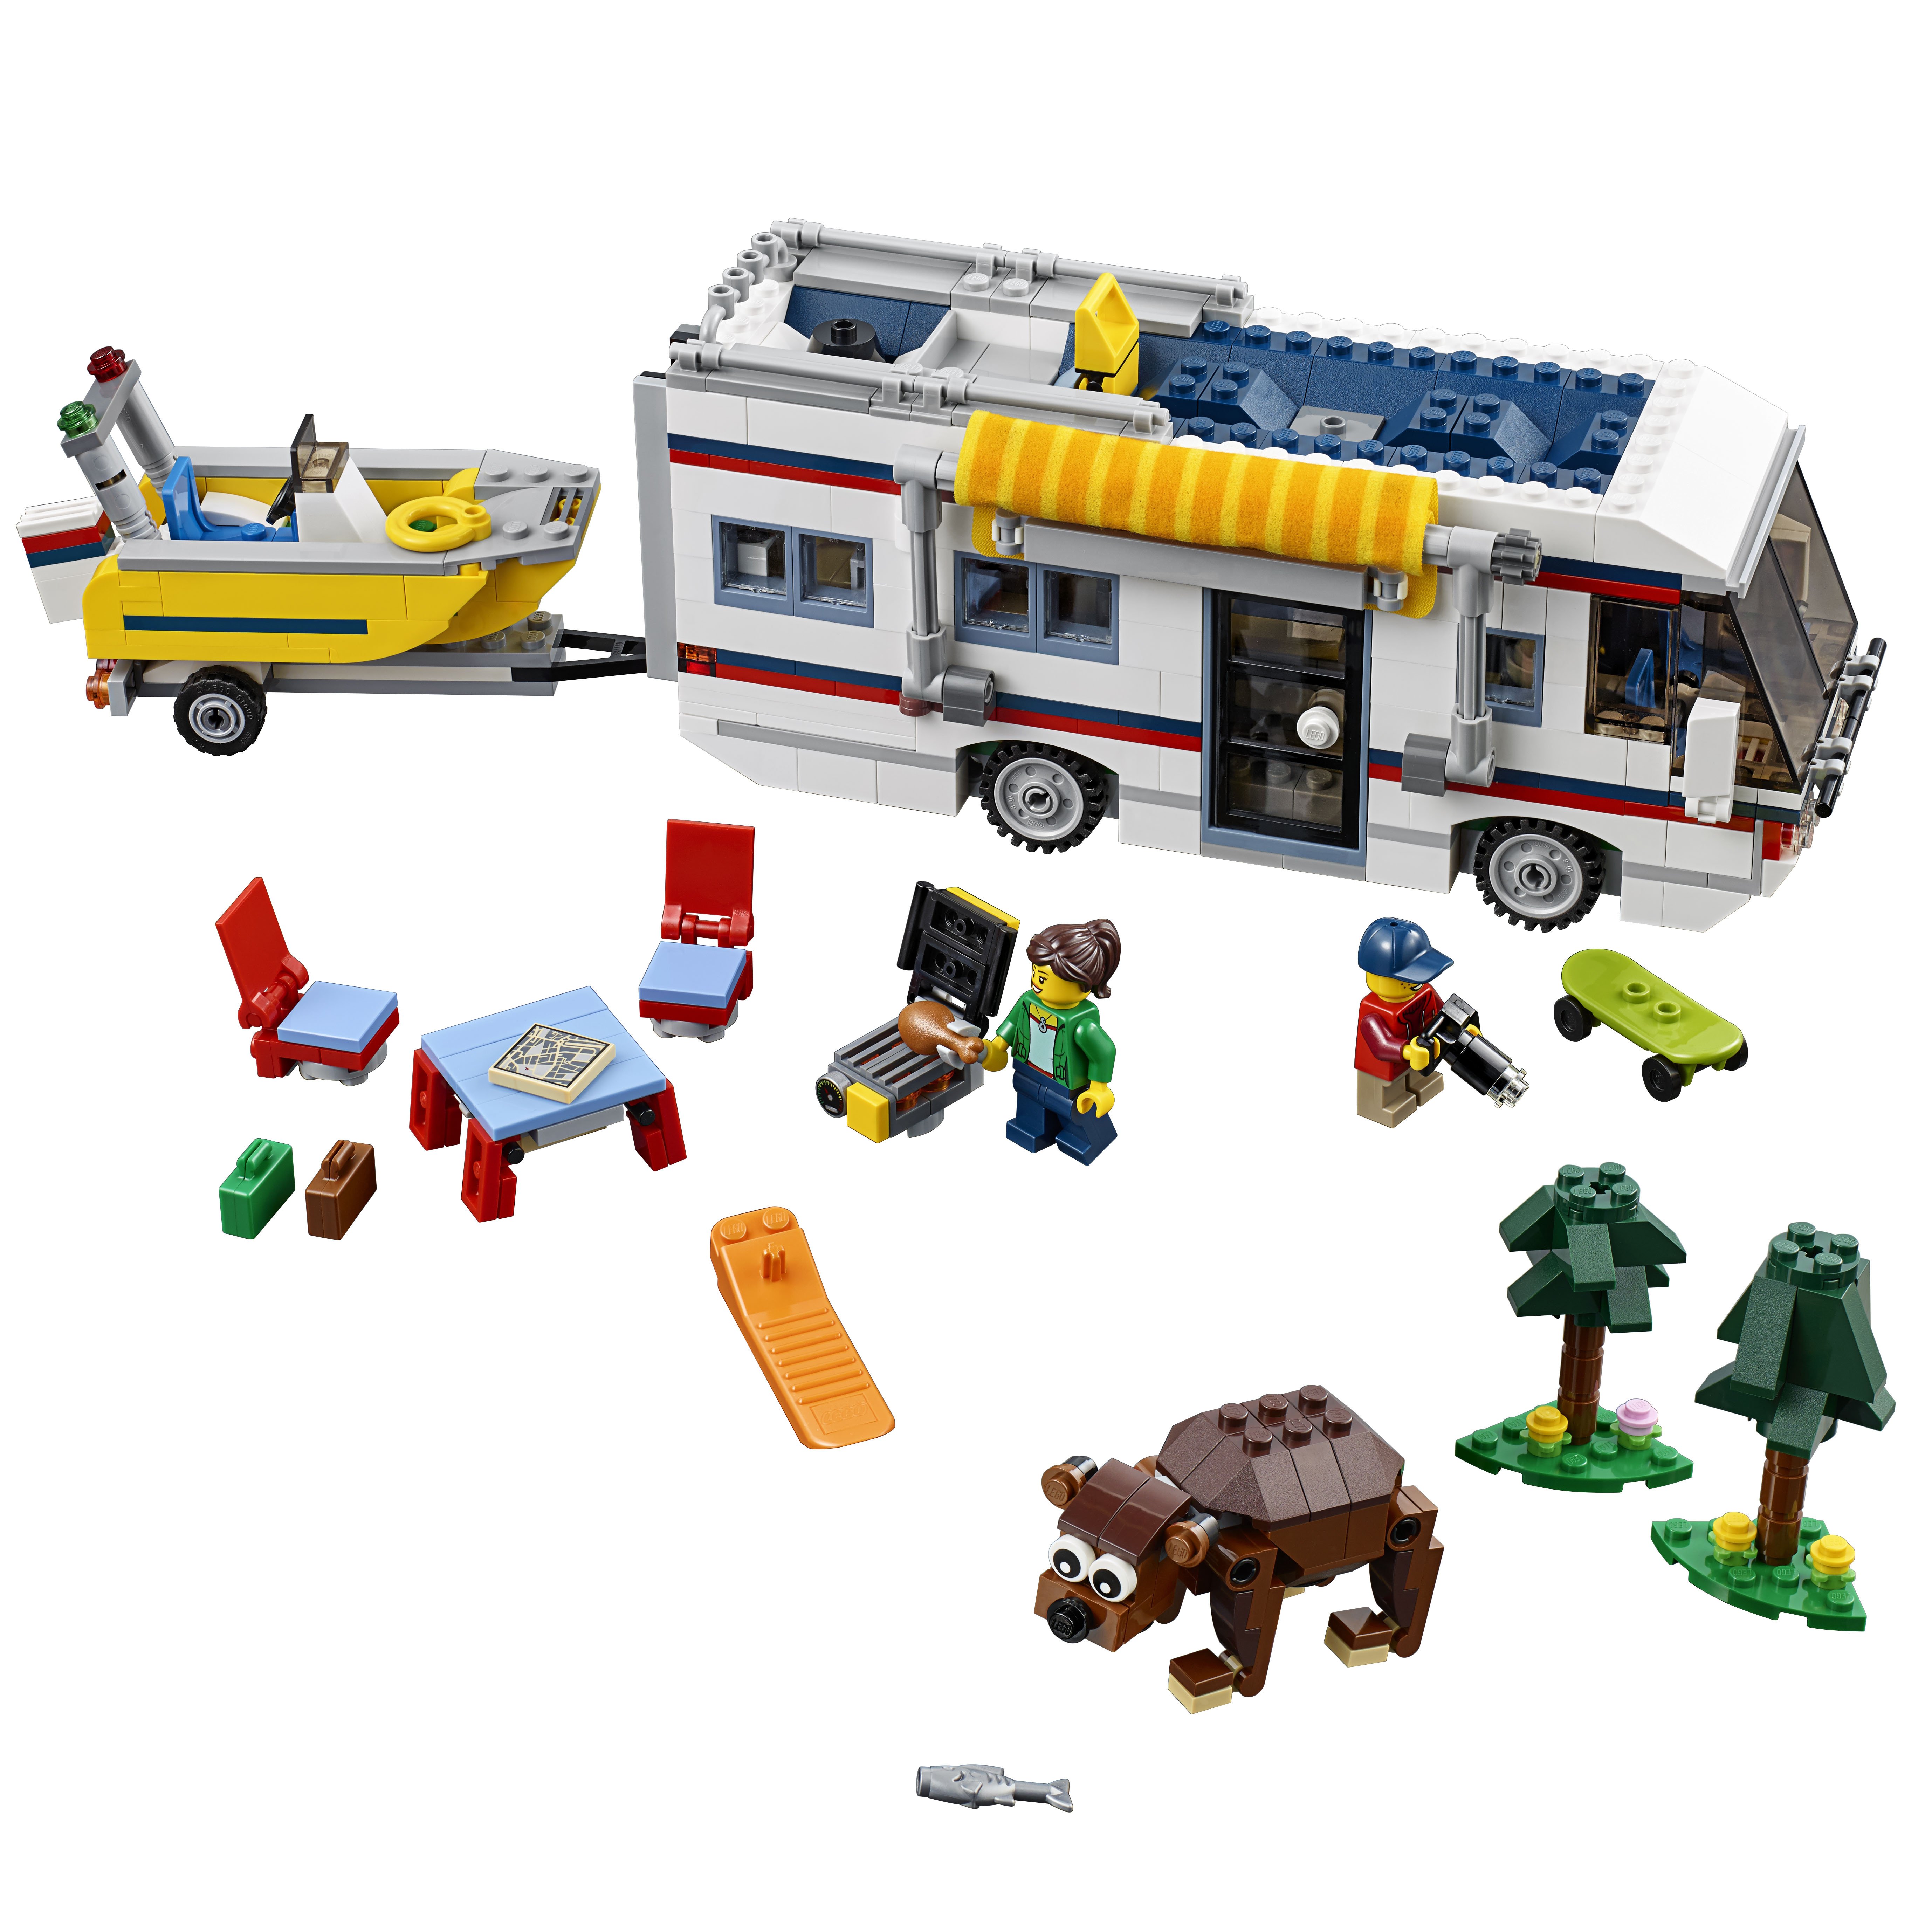 LEGO Creator Vacation Getaway 3in1 Camper, Summer Home, and Yacht